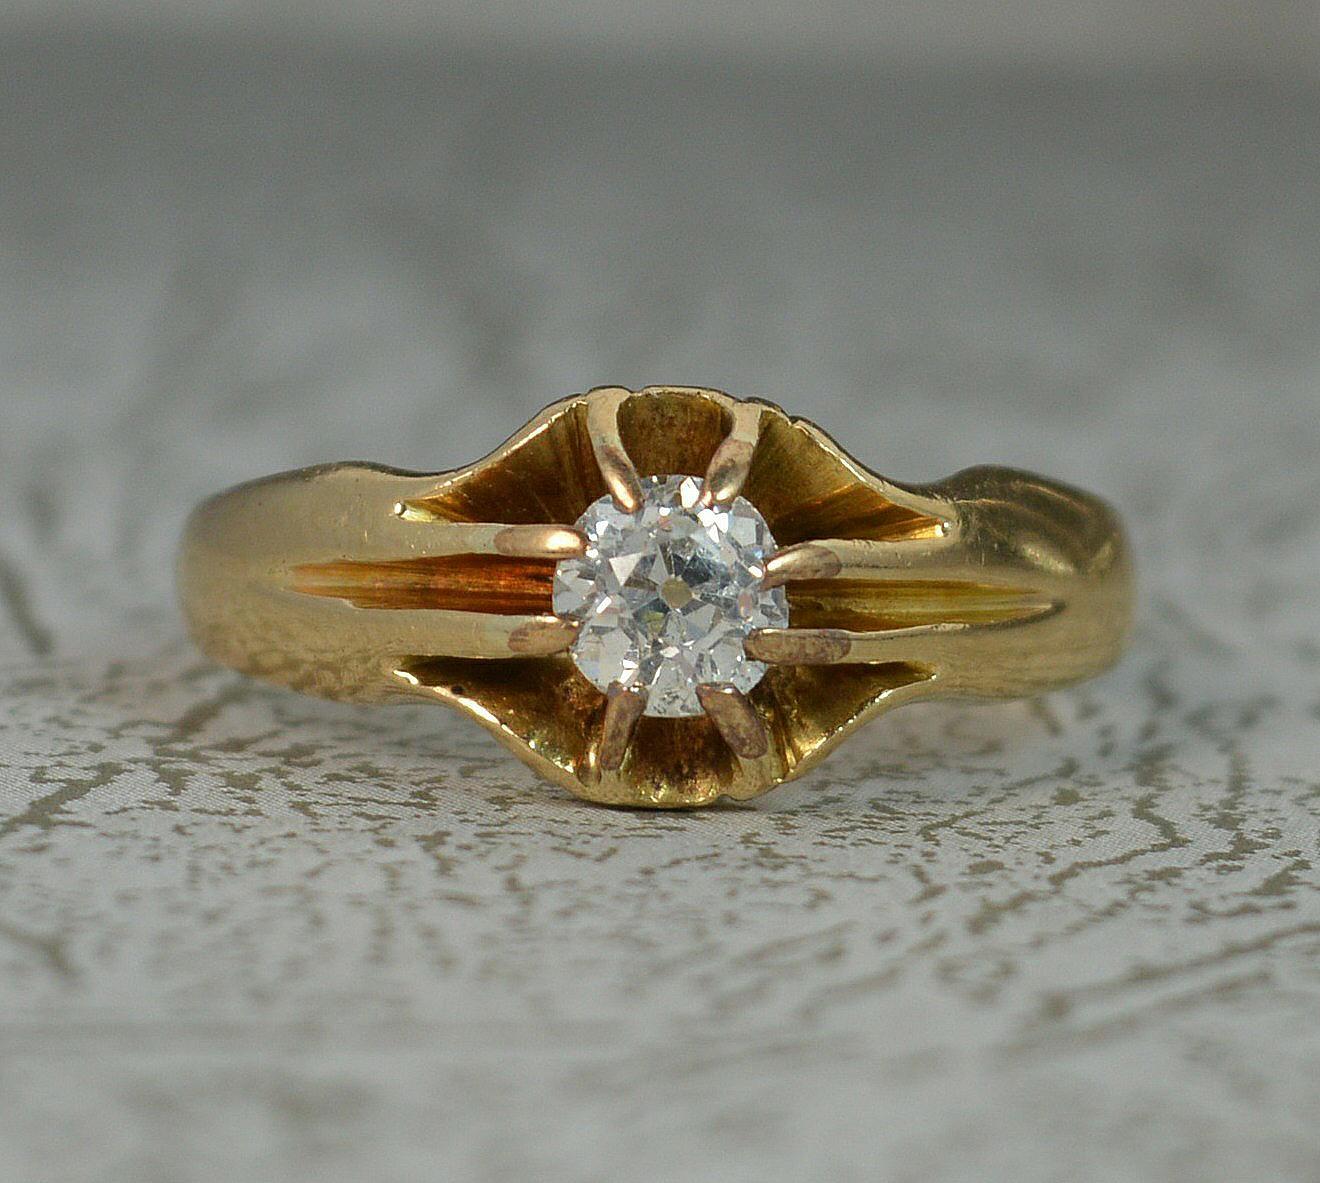 A true antique diamond and 18ct gold solitaire gypsy ring.
Solid 18 carat gold example, English made, set with a single diamond.
Eight claw setting holding a natural old European cut diamond to centre, approx half a carat. 4.85mm diameter.
8.5mm